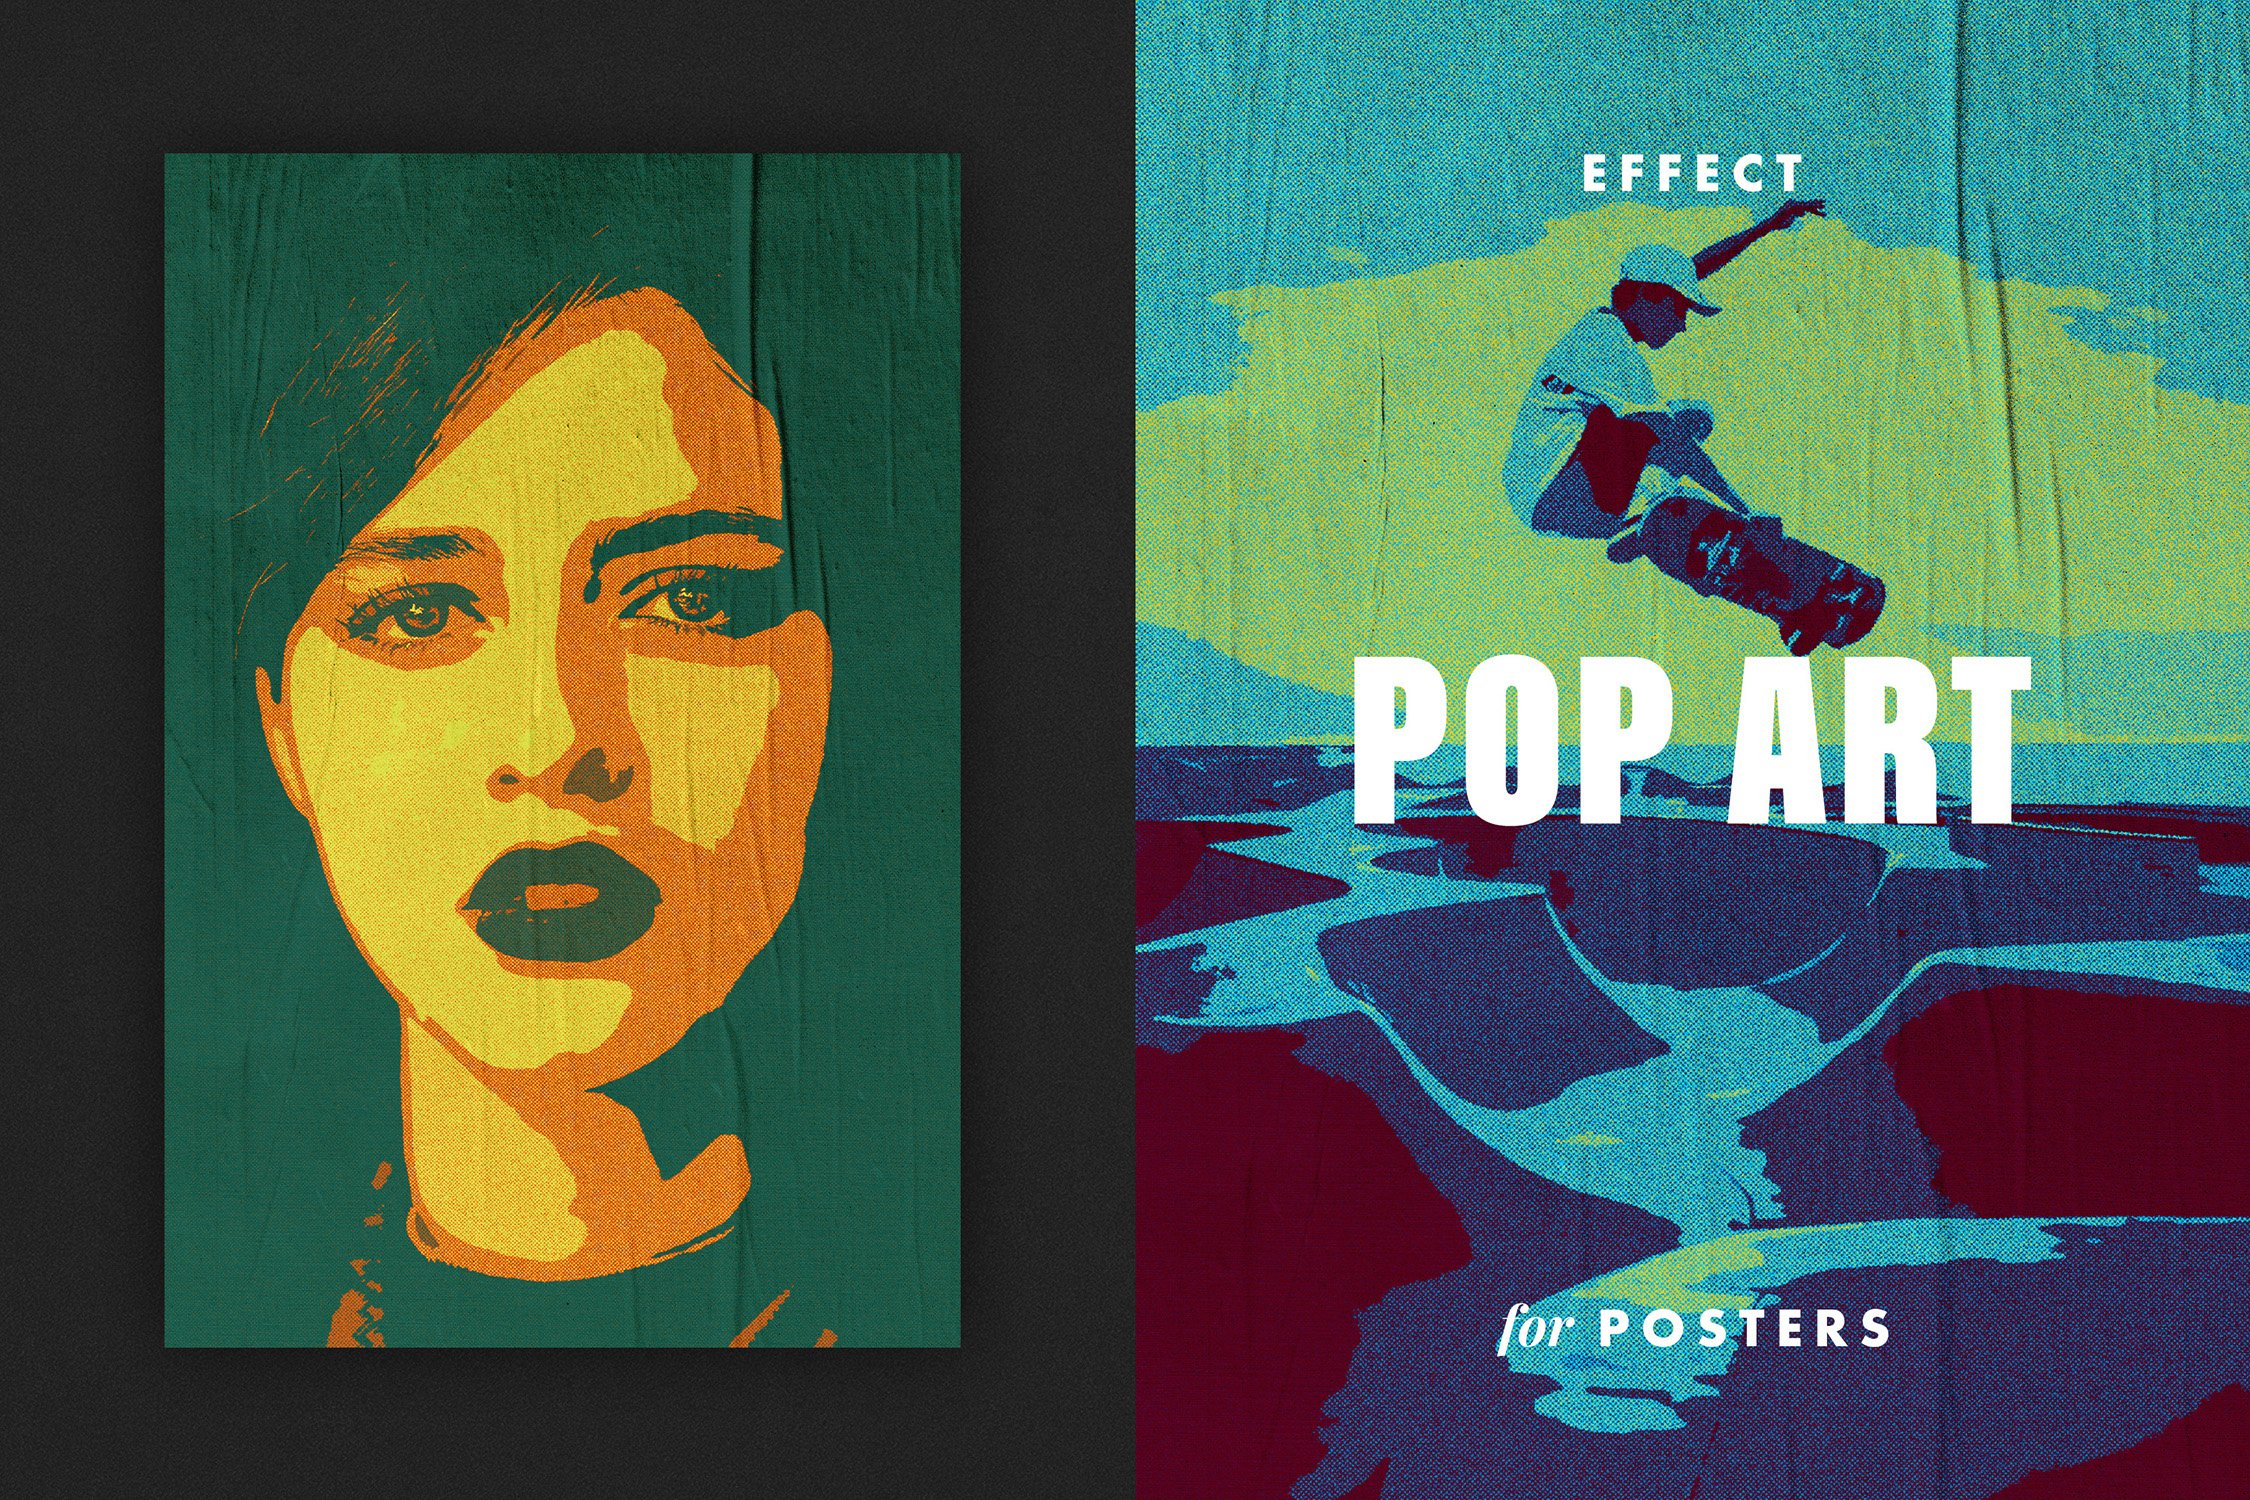 Pop Art Effect for Posterscover image.